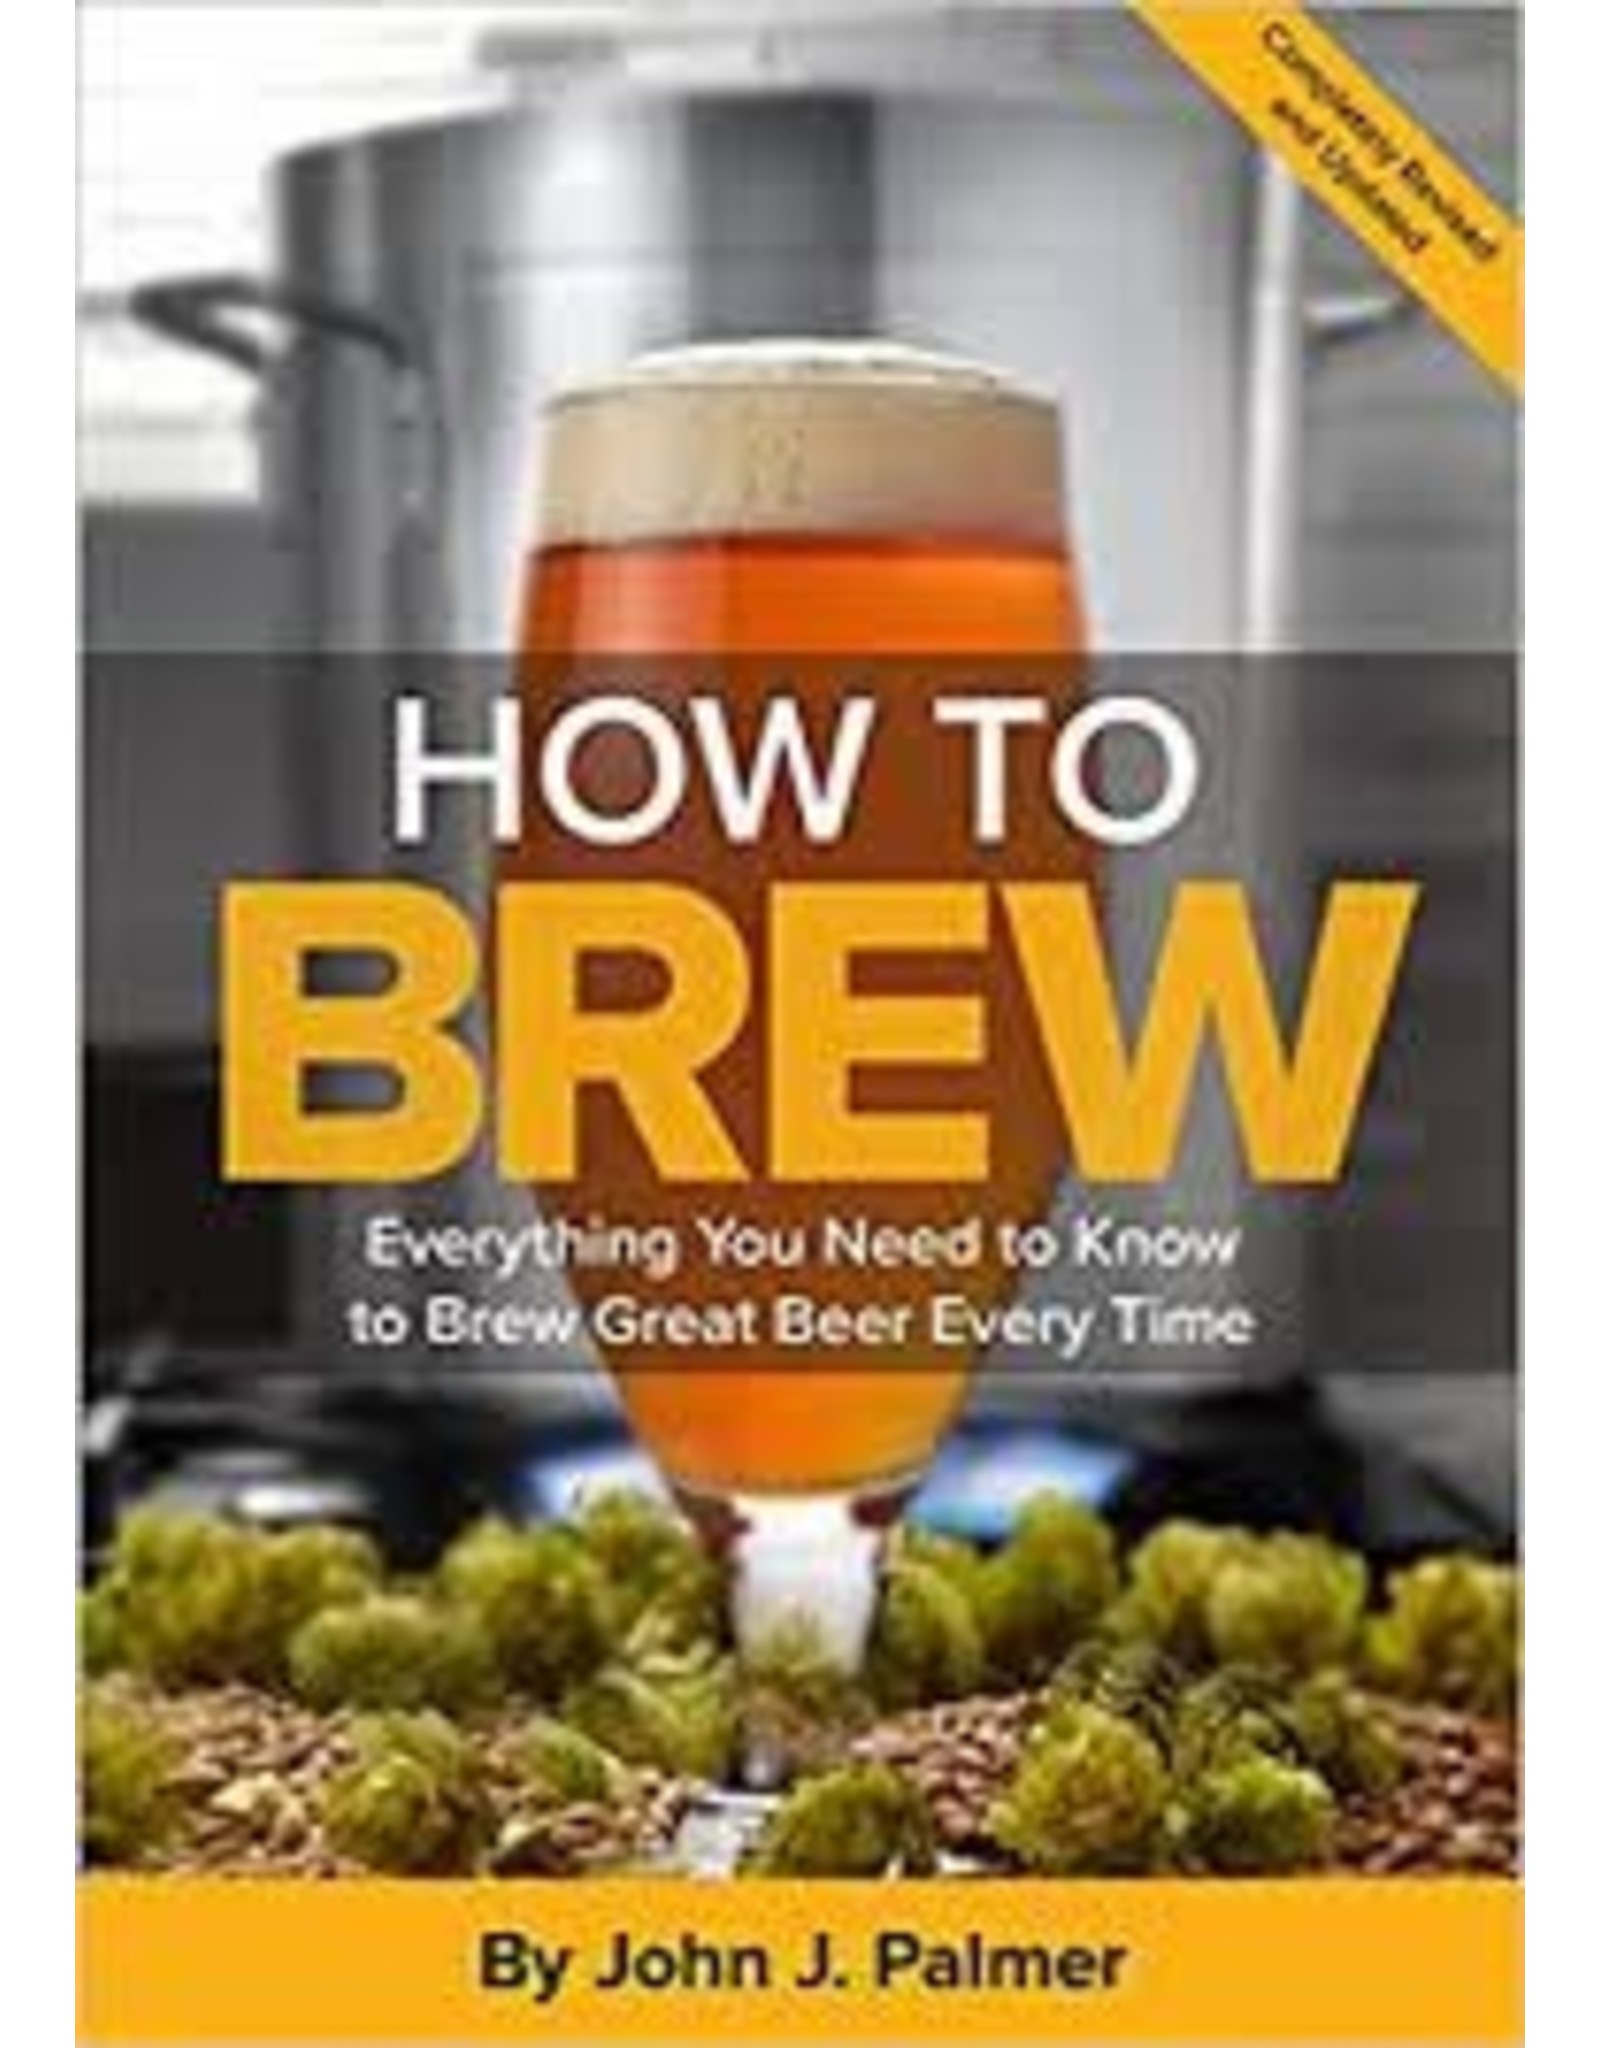 How to Brew (Palmer)   book